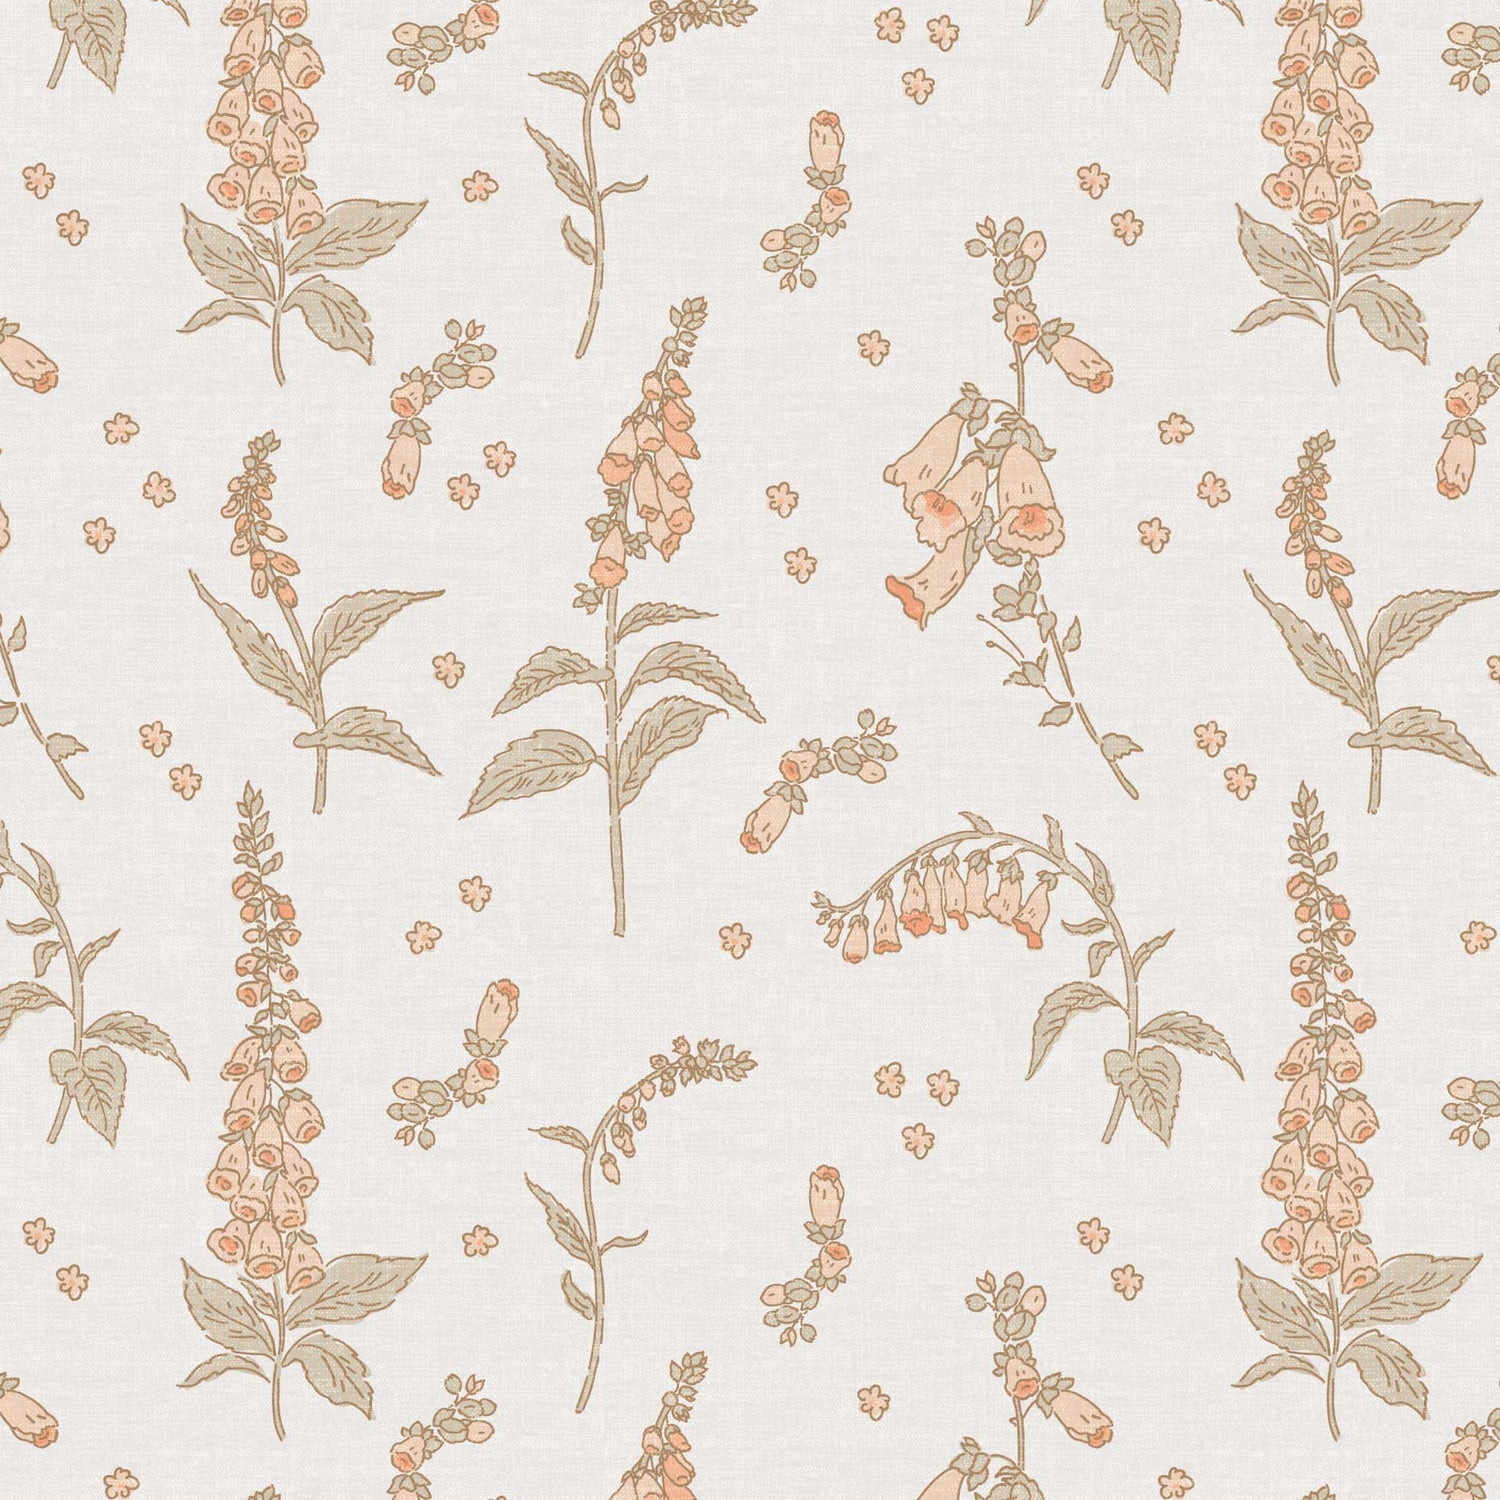 Enliven the spirit of any space with this gorgeous Foxgloves Wallpaper - Soft Gray! Its delicate botanical design will bring a touch of feminine charm & character to your walls. Perfect for a nursery or a playroom space.